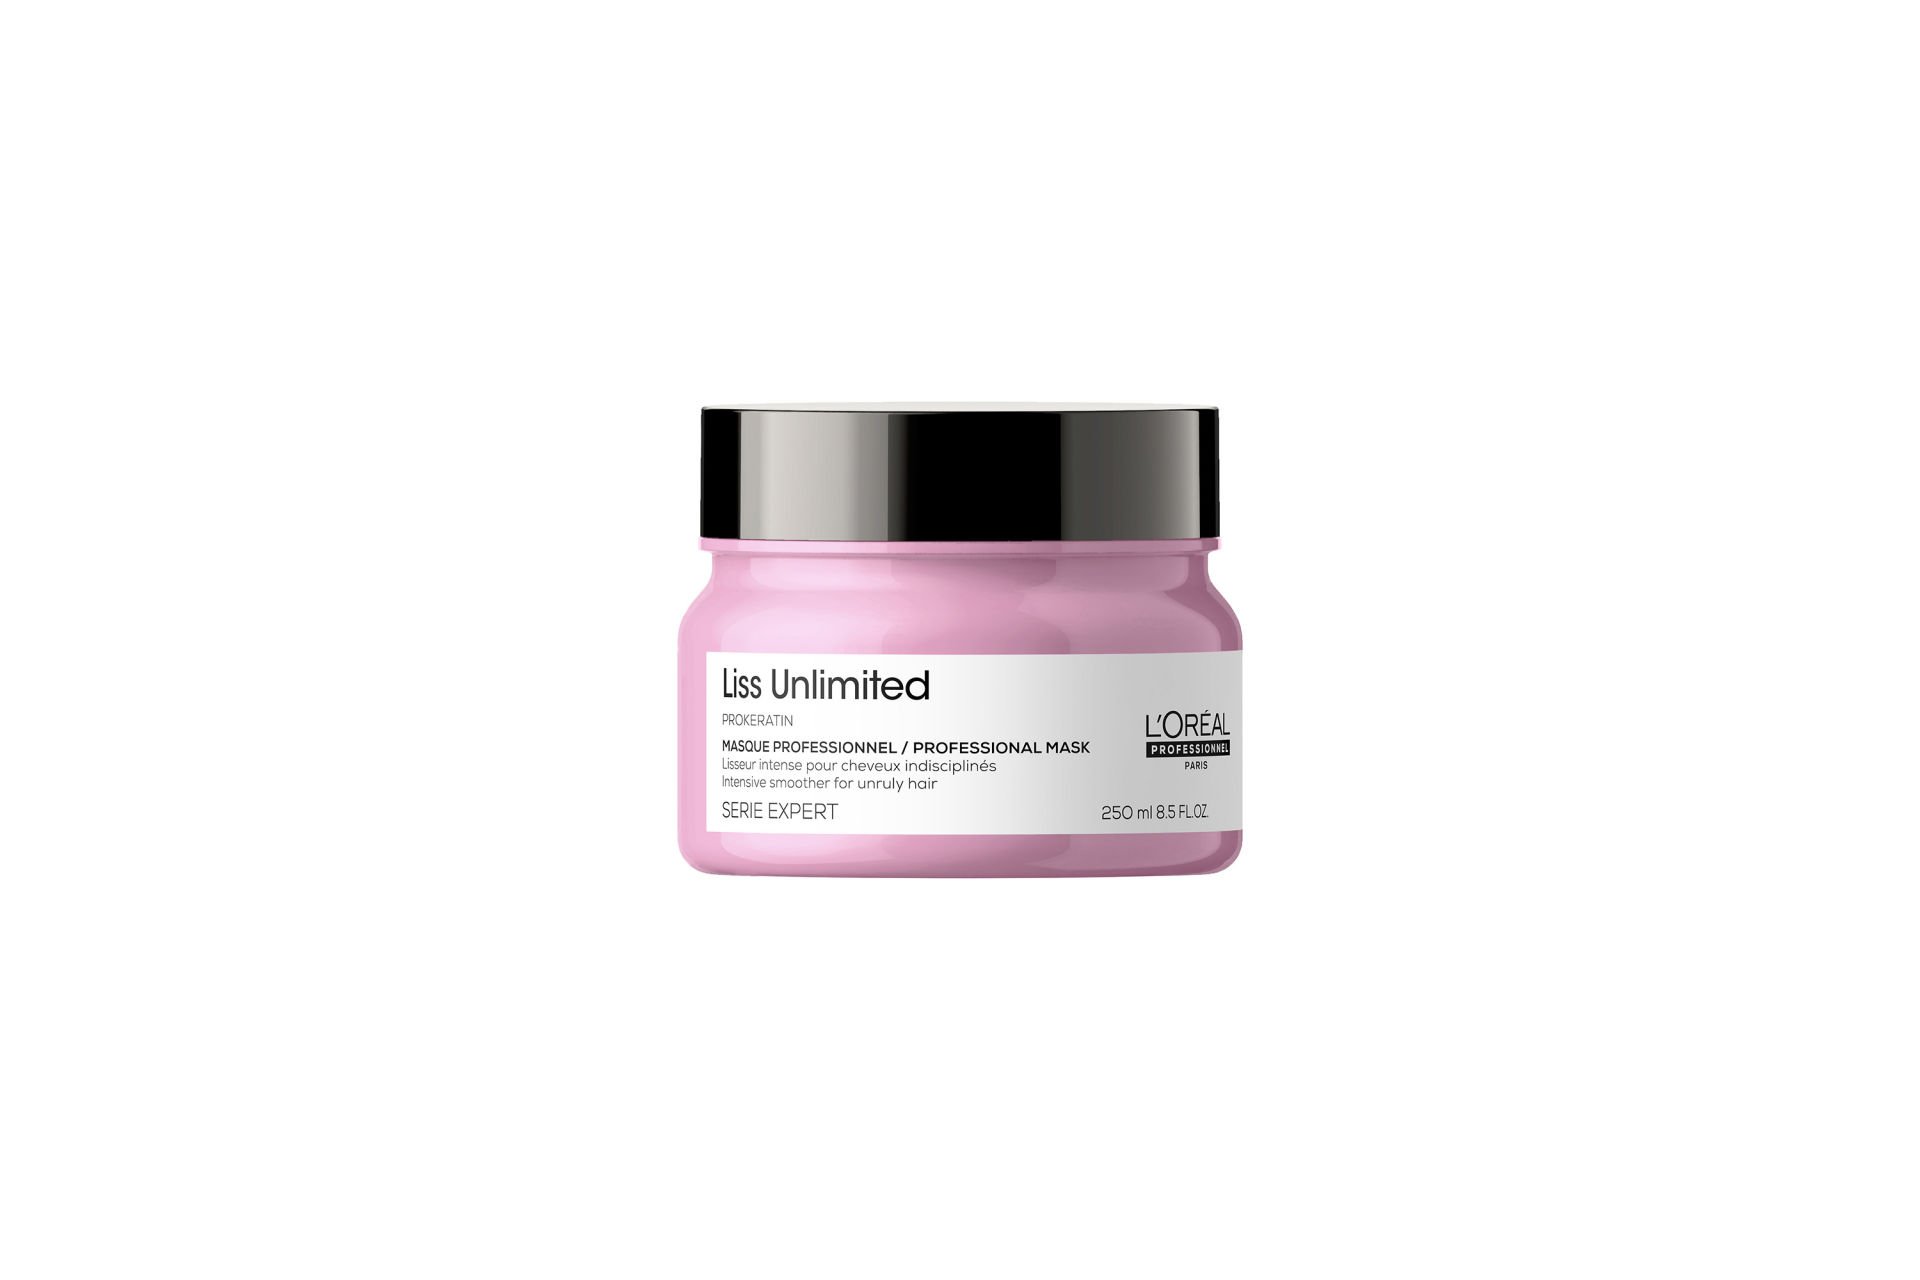 Loreal Professionnel Serie Expert SE21 Liss Unlimited Prokeratin Masque 250 Ml.